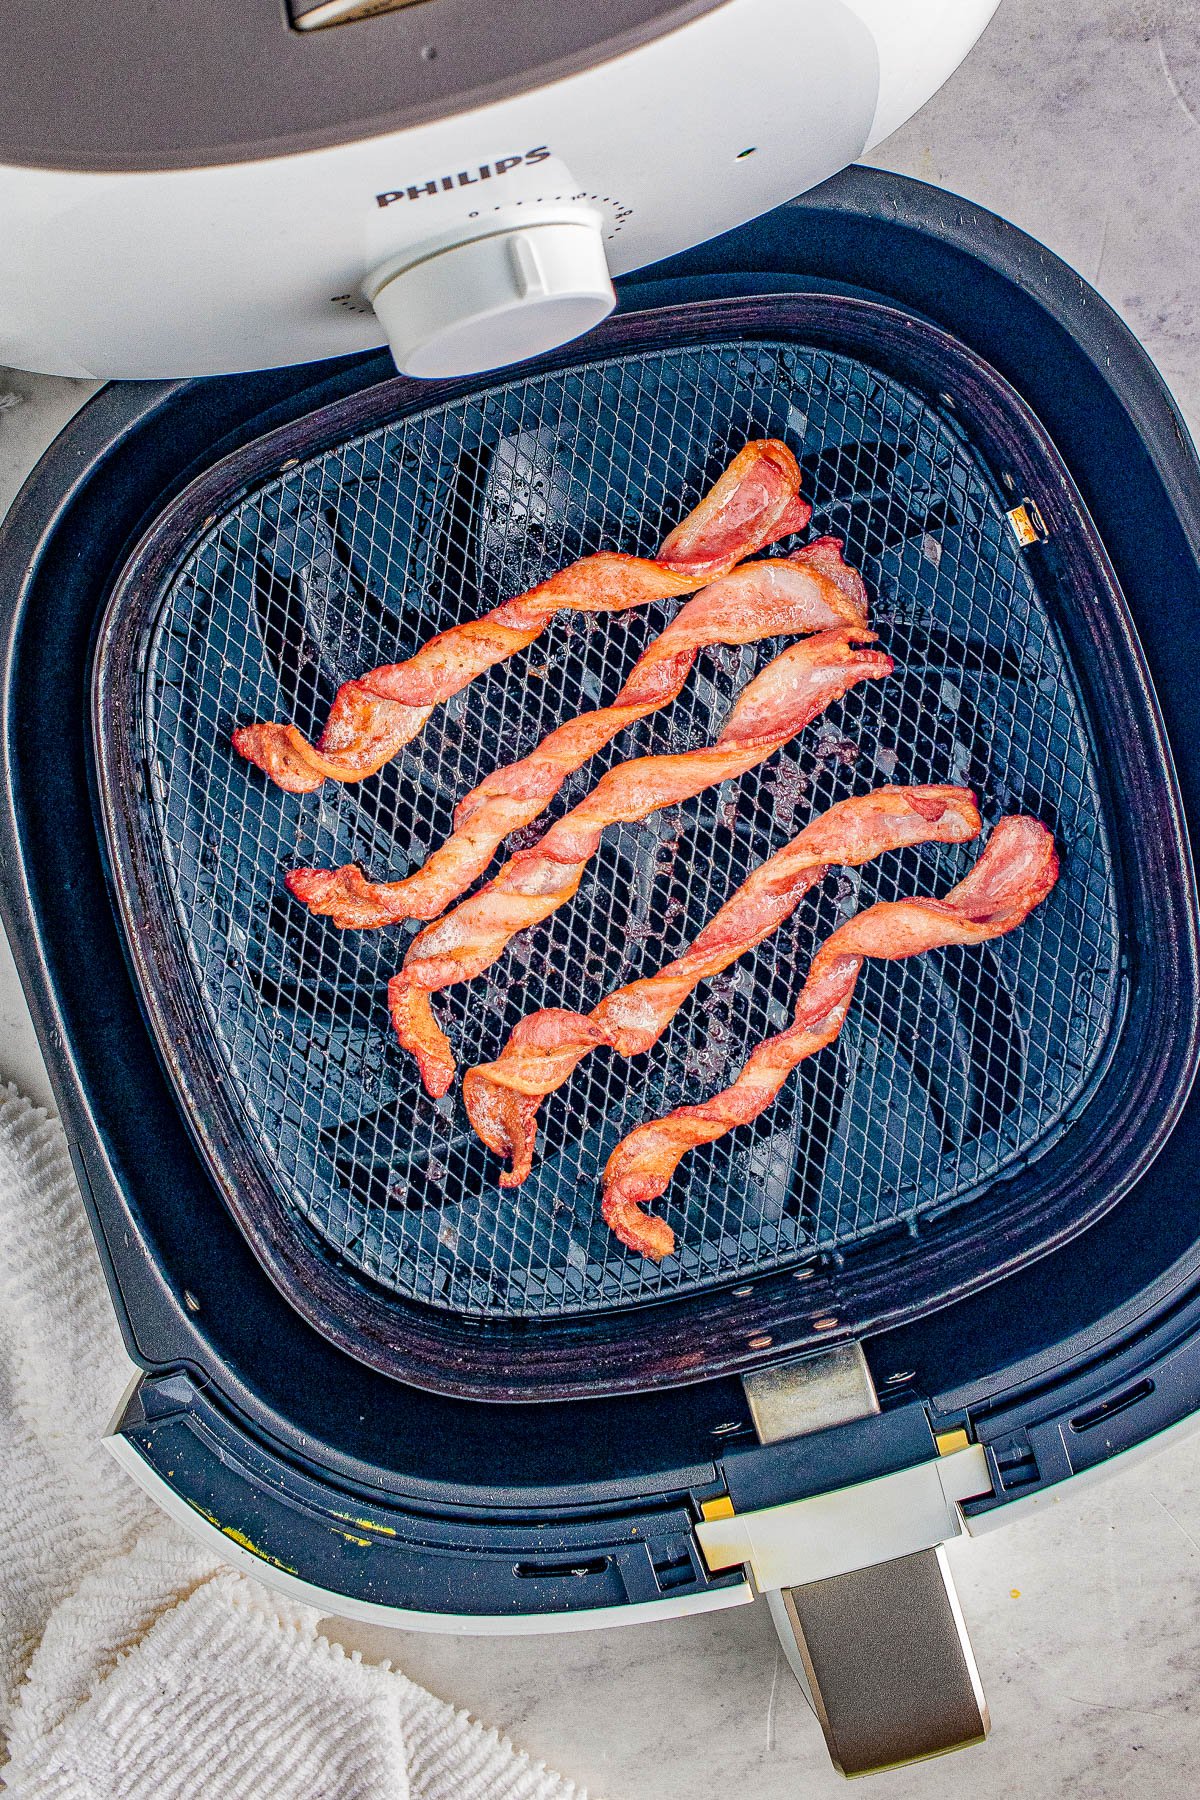 Air Fryer Twisted Bacon - Every bite of this twisted bacon is lightly crisped on the outside while being tender, juicy, and delicious on the inside! Learn how to make this TikTok trend-inspired bacon in your air fryer. FAST, EASY, and so crave-worthy! Oven baking instructions also provided.